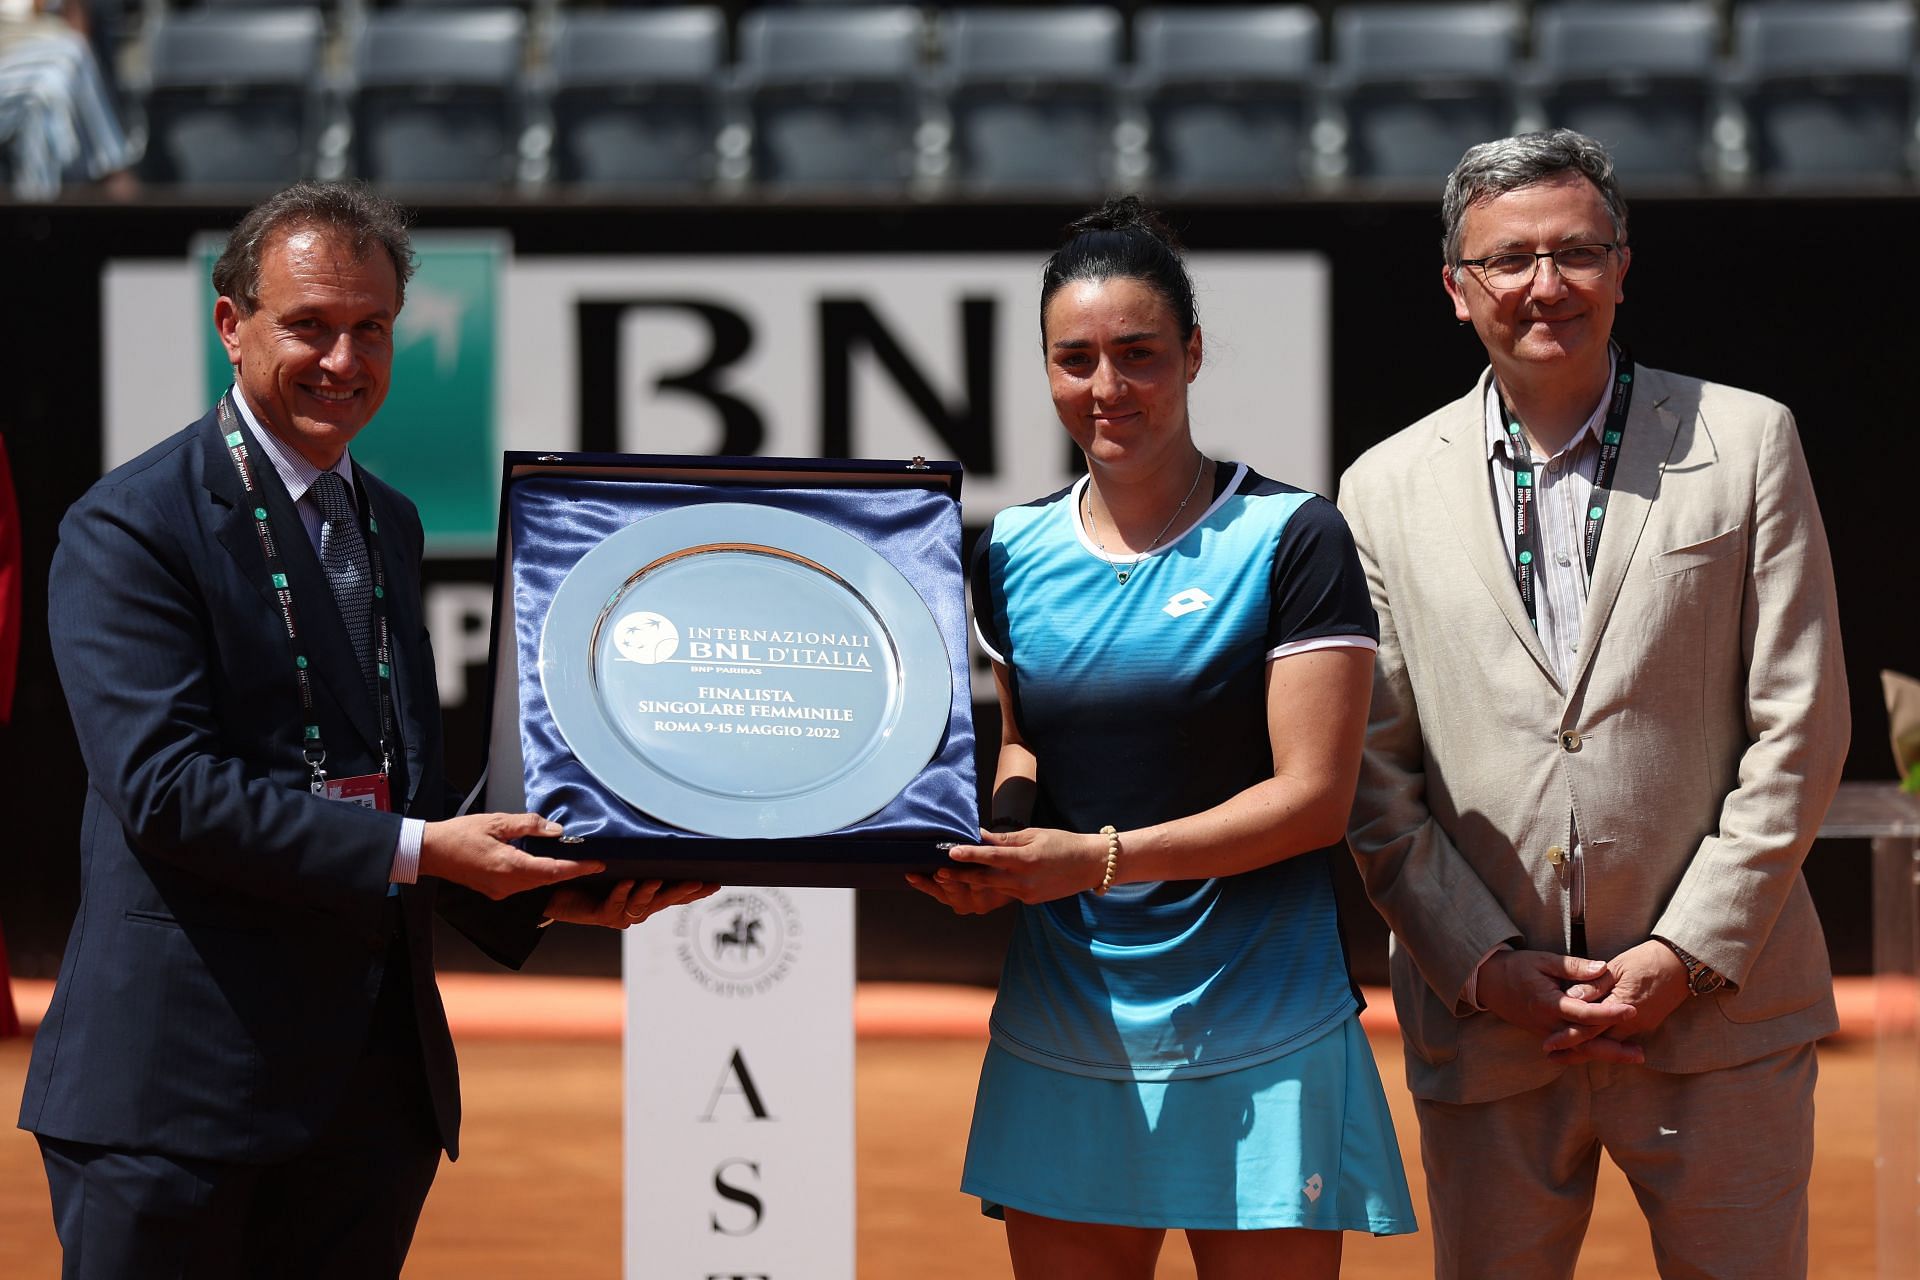 Italian Open 2023: Women's singles draw analysis, preview and